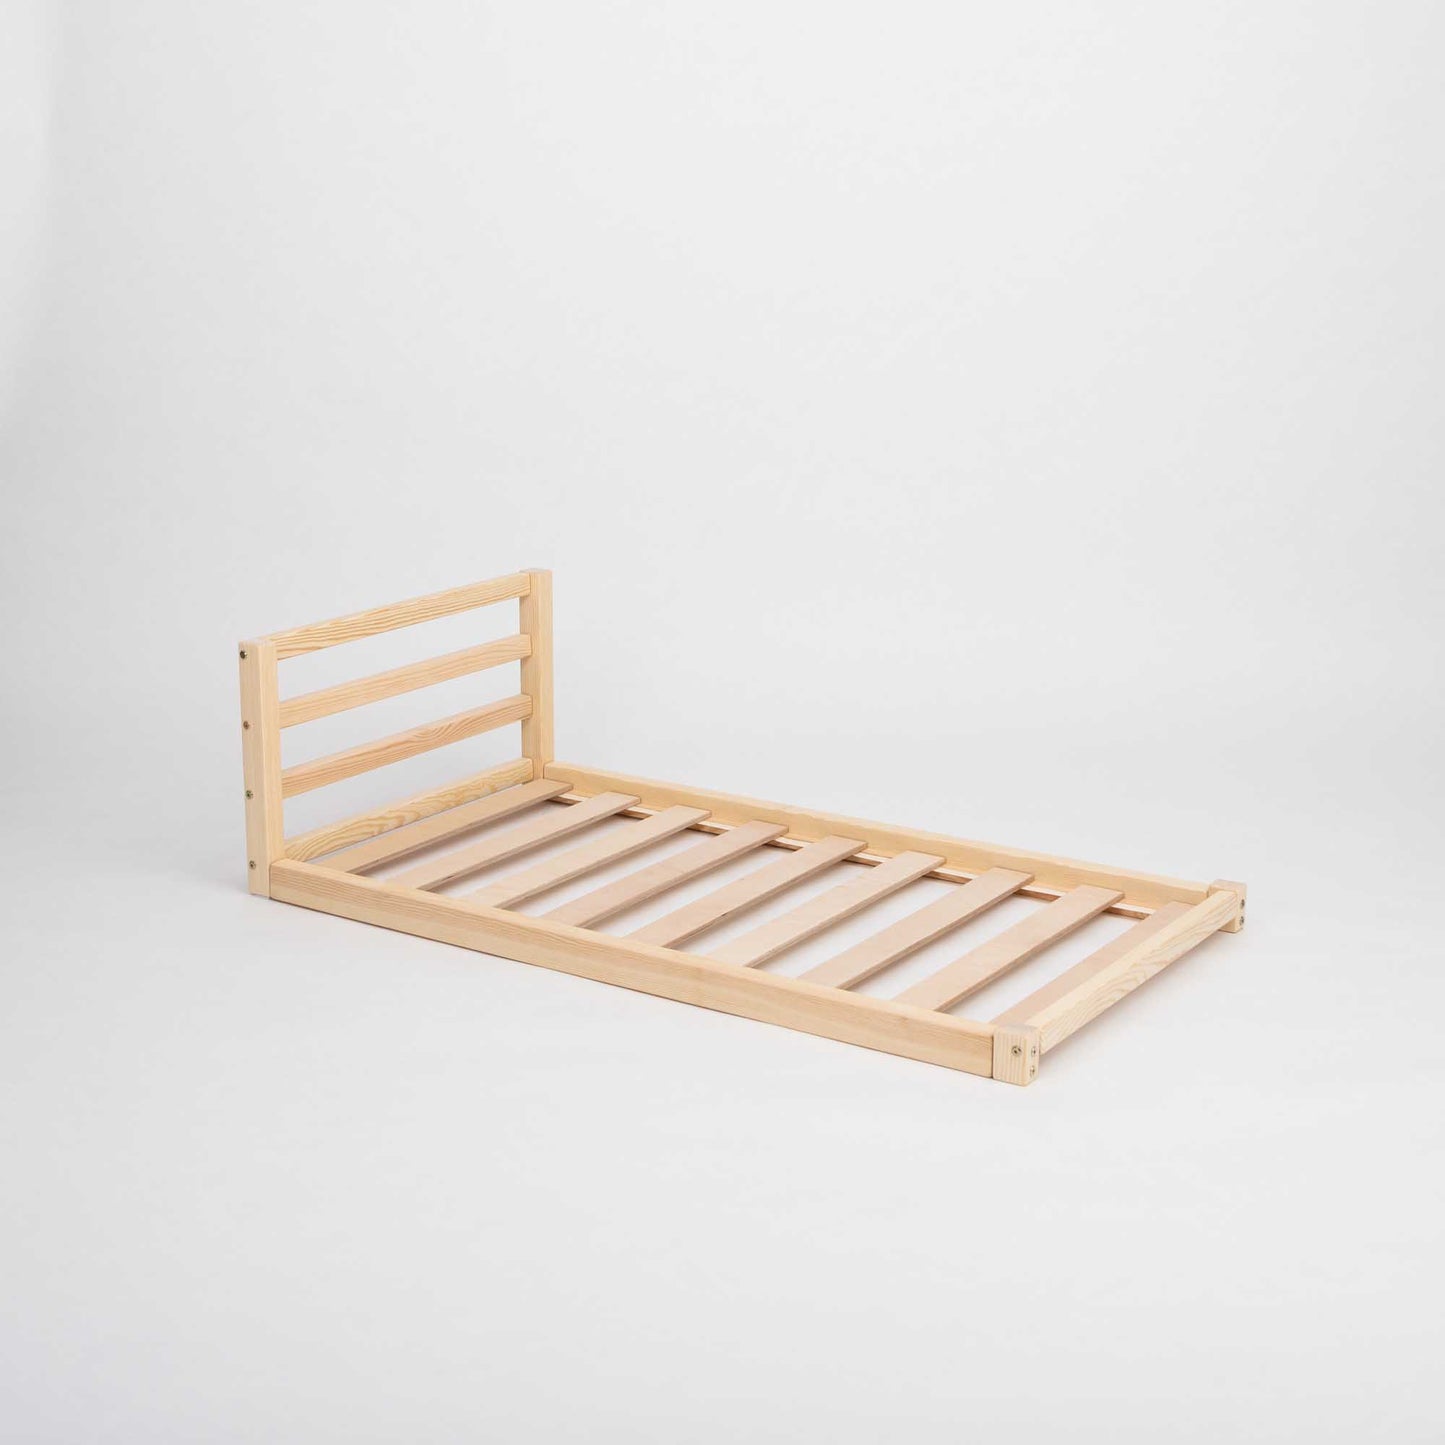 A Sweet Home From Wood toddler floor bed with a horizontal rail headboard, perfect for independent sleeping in a children's bed.